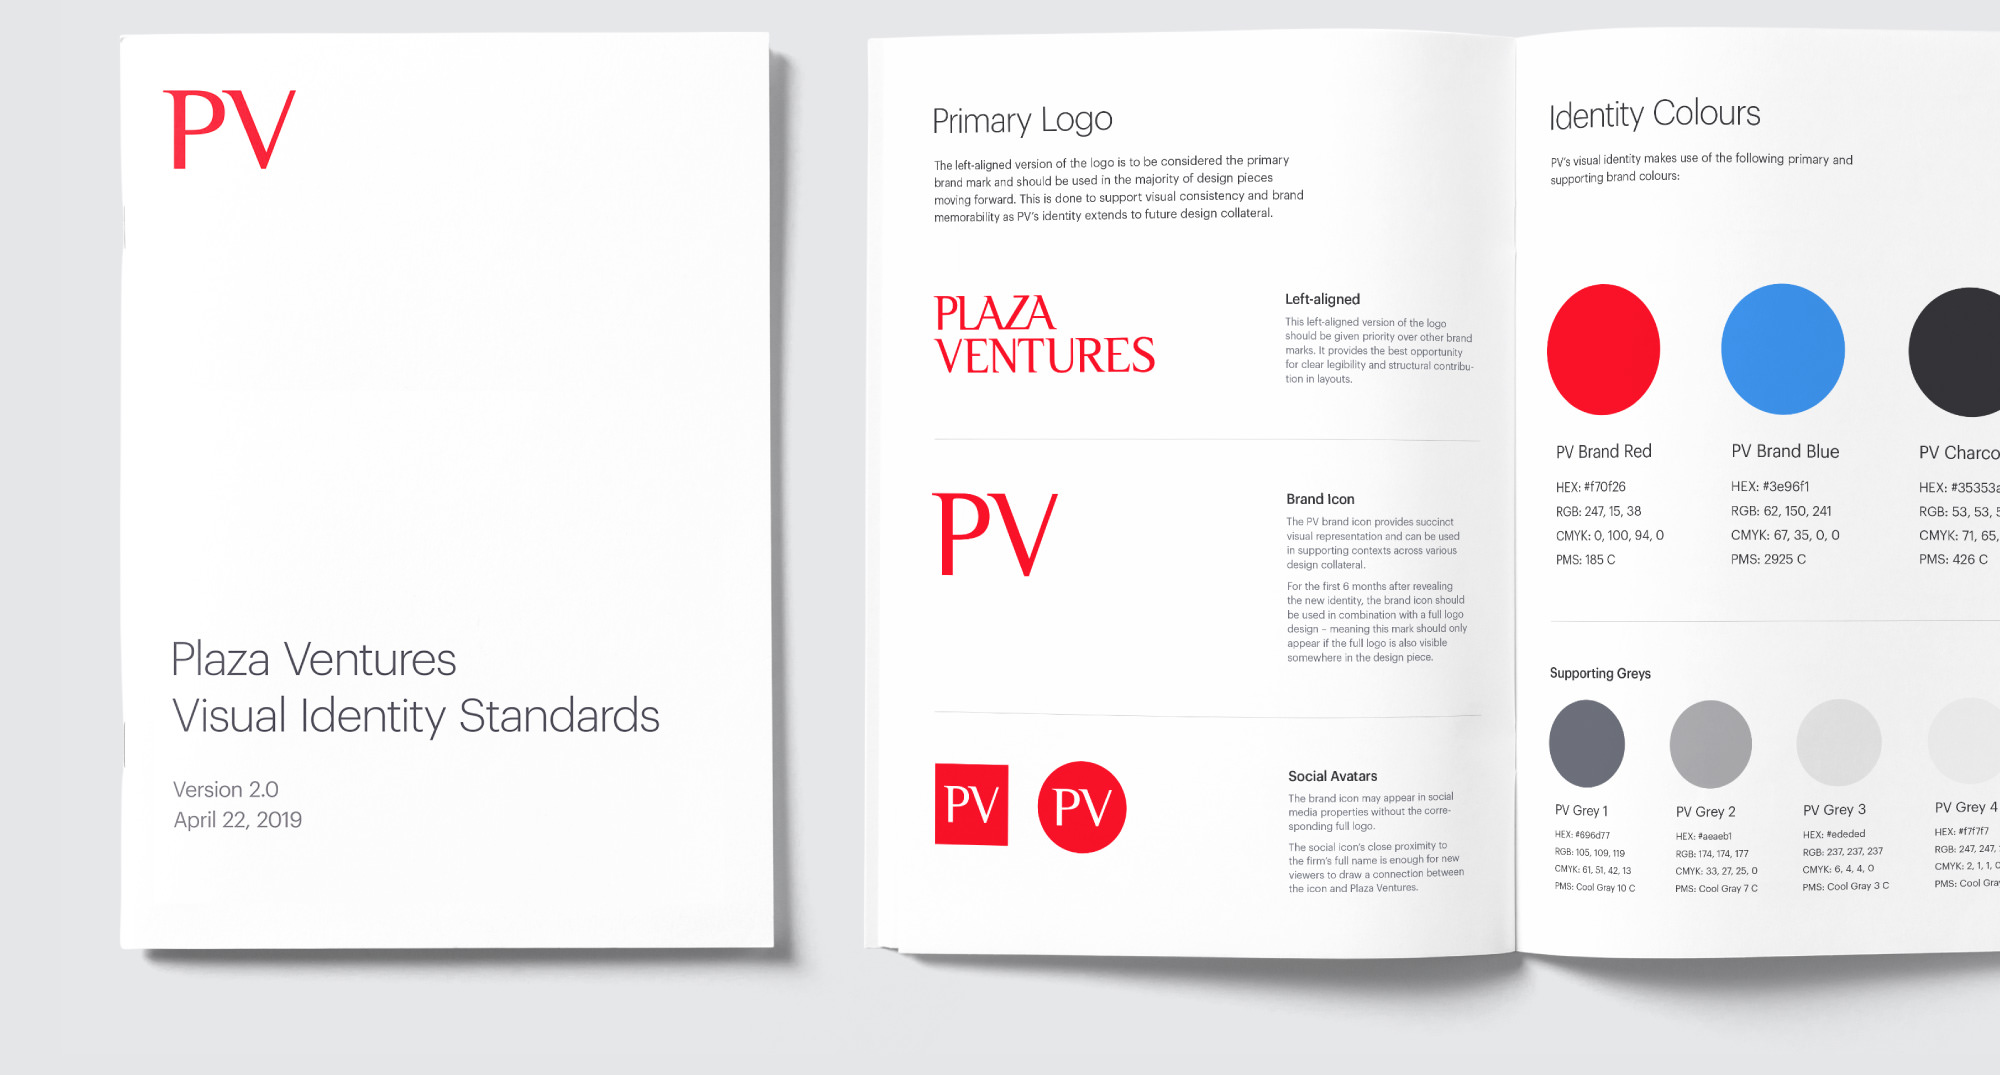 Plaza Venture’s Visual Identity Standards cover and internal spread showing logo design update and identity colours